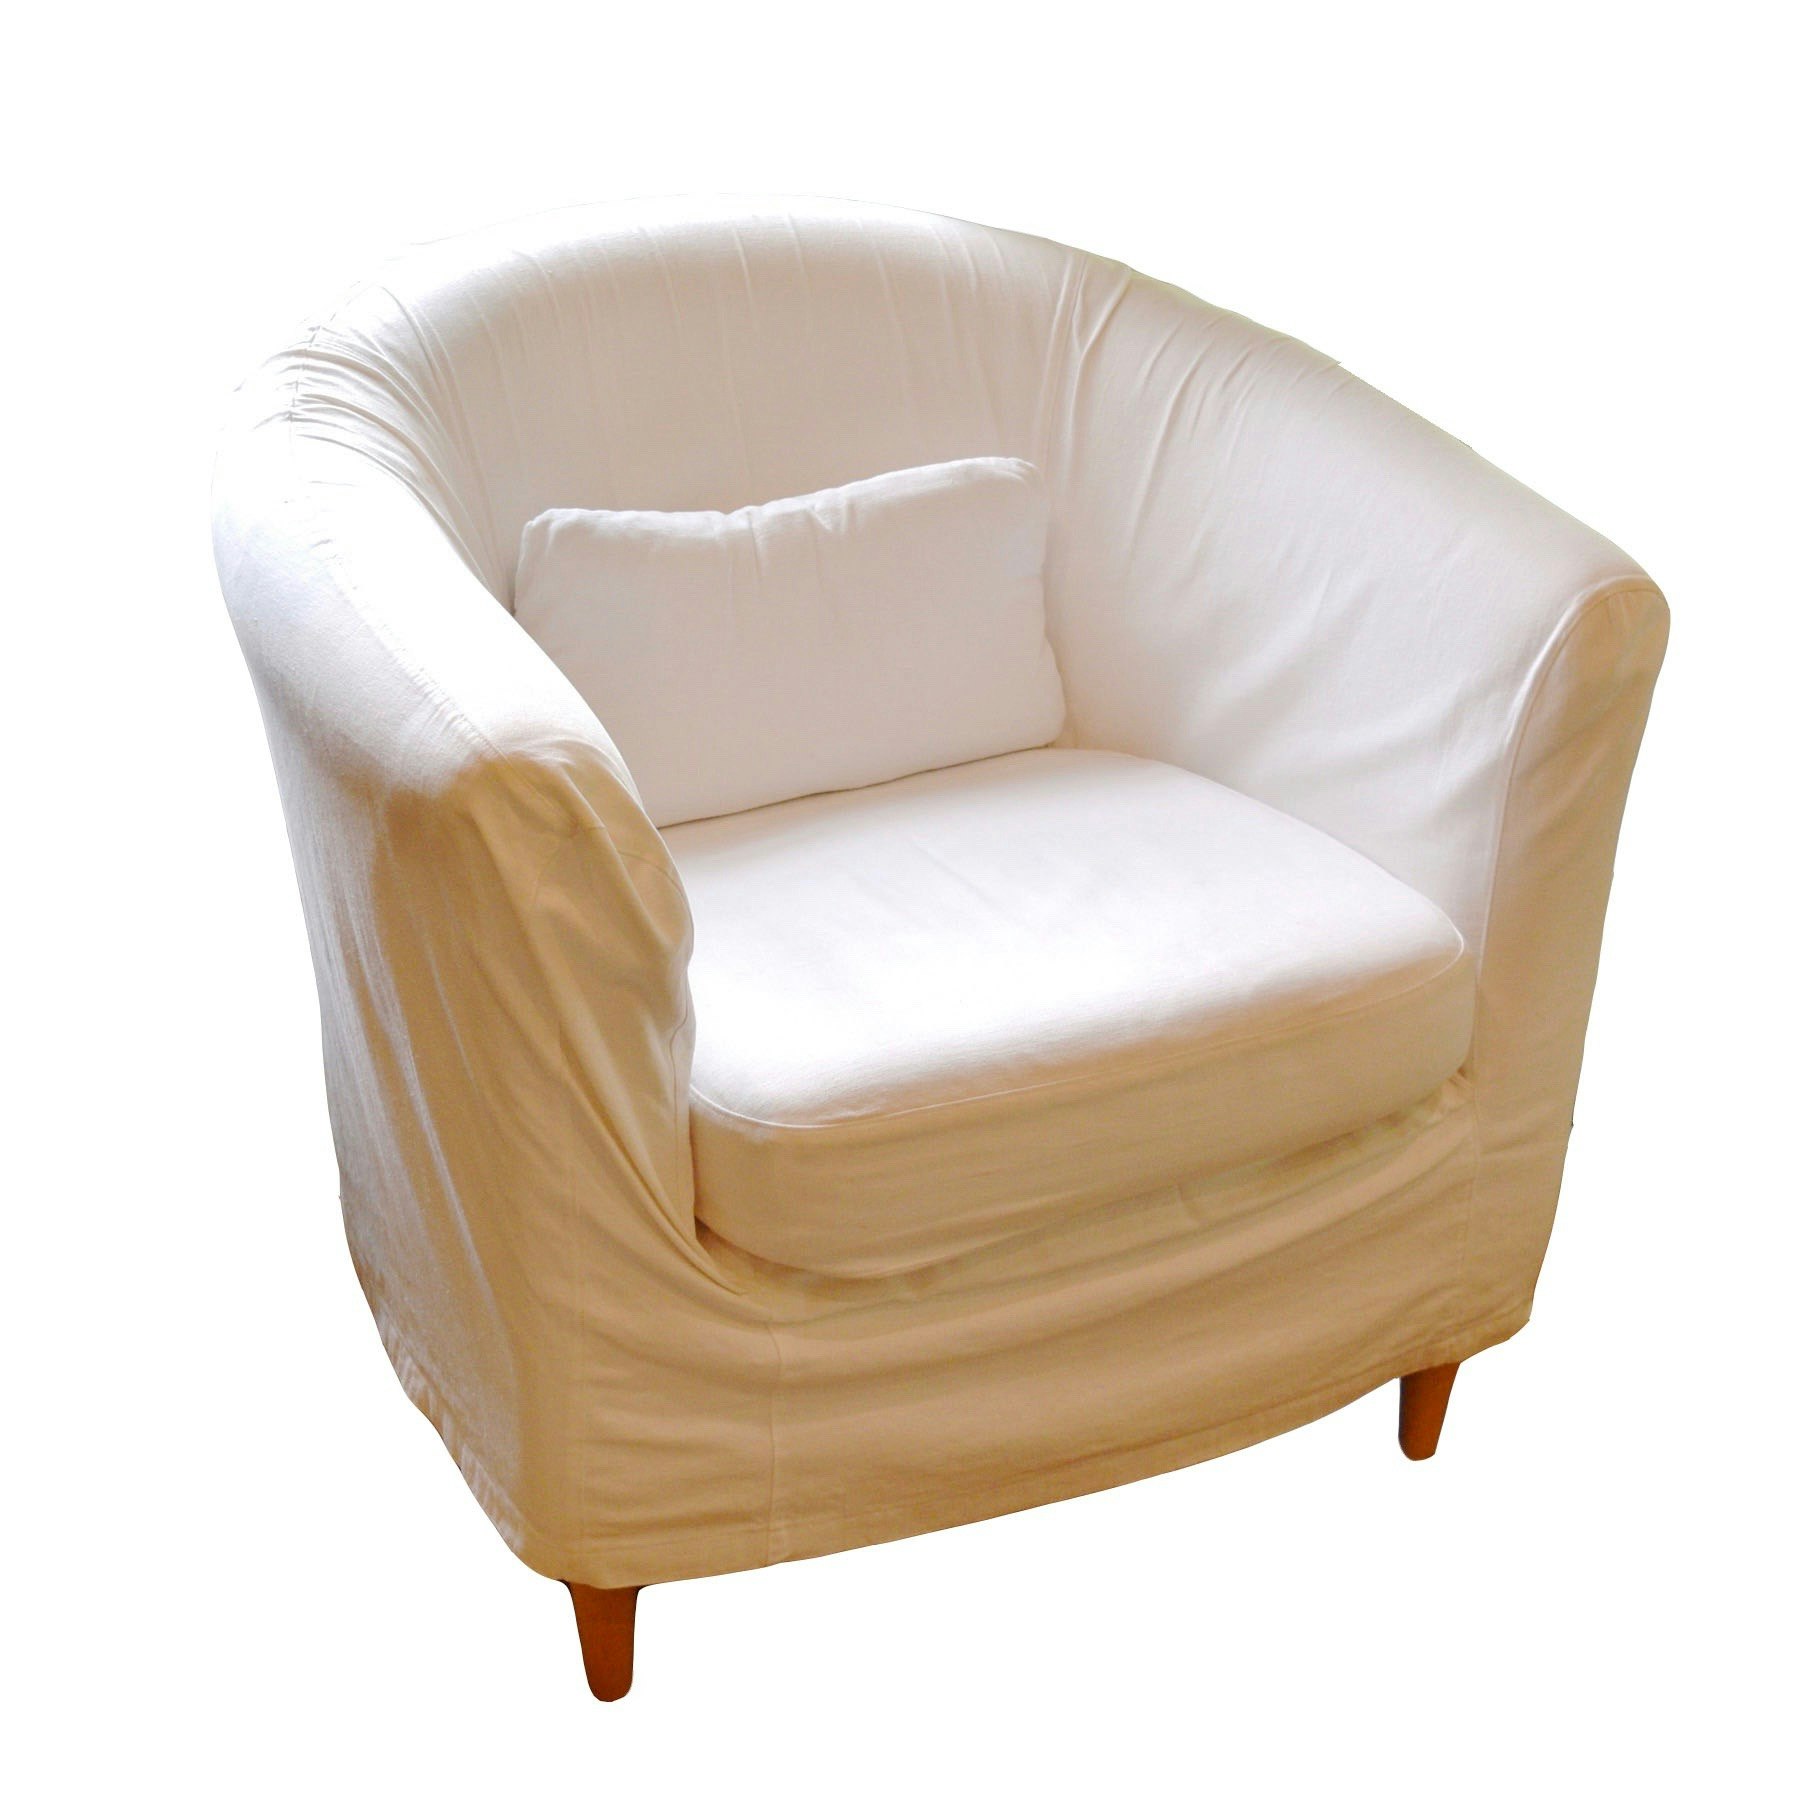 New Ikea Chair Covers Tullsta for Large Space